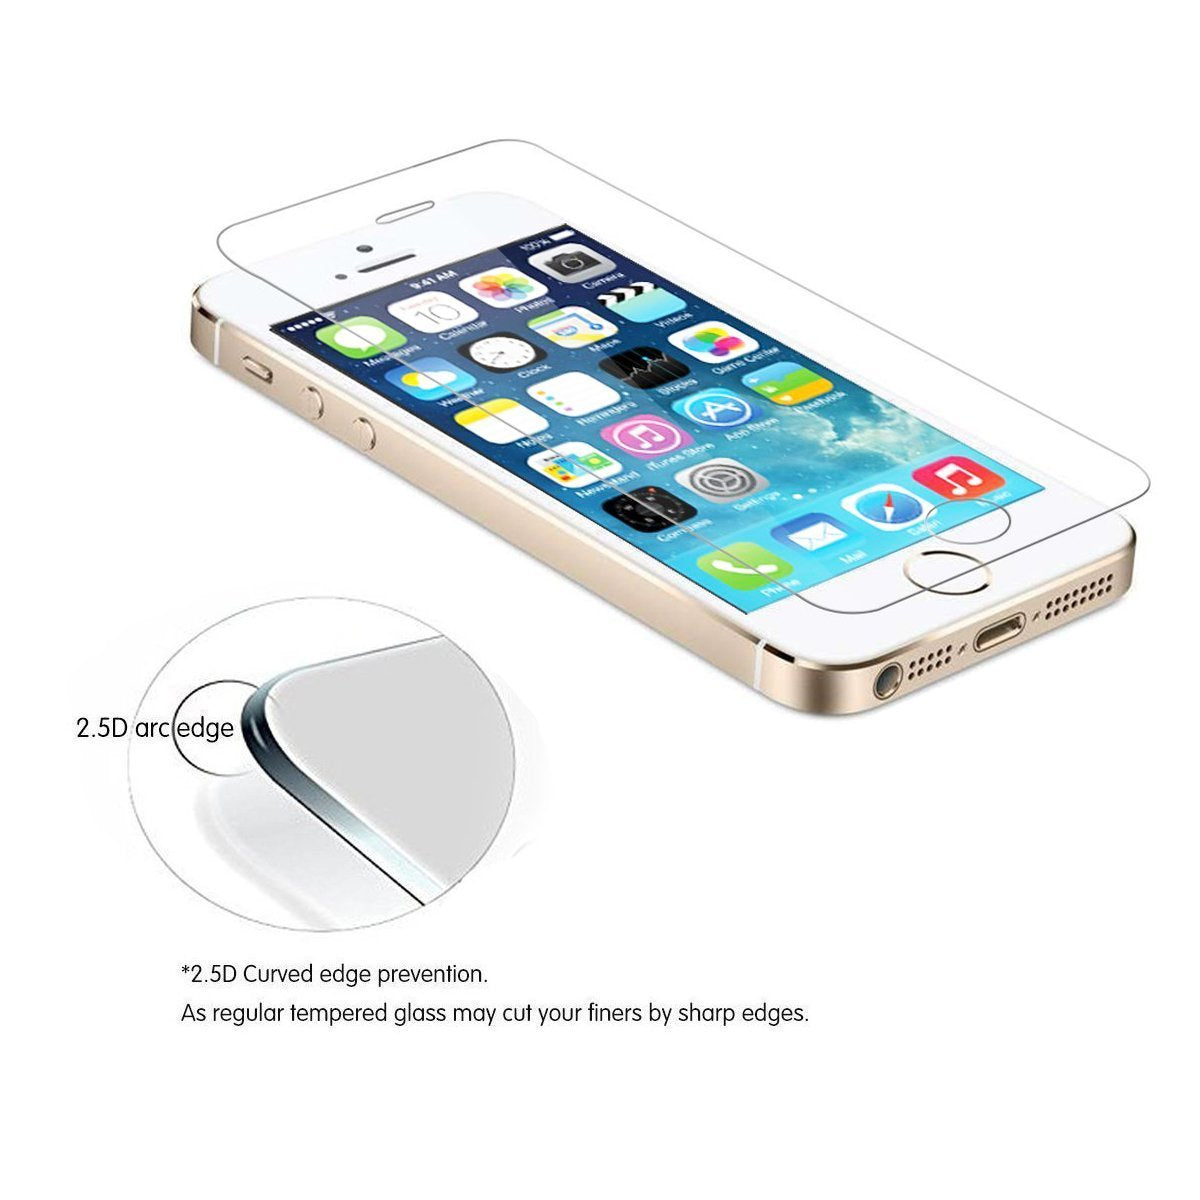 Premium Tempered Glass Screen Protector For Iphone Se, Iphone 5S, Iphone 5C, Iphone 5